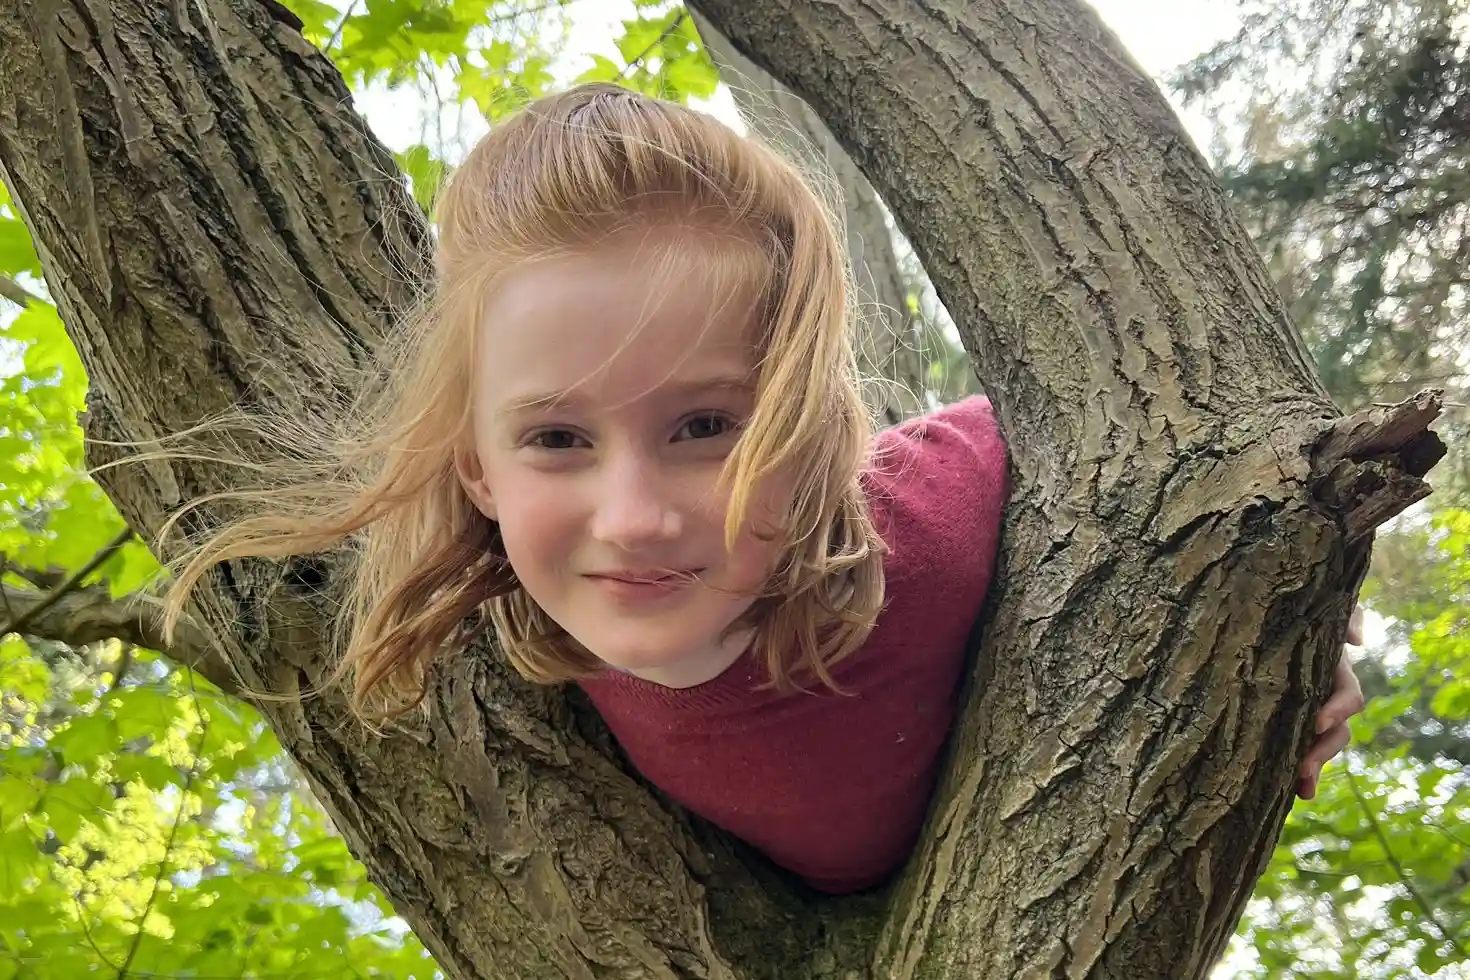 Girl smiling while peeking through the branches of a tree